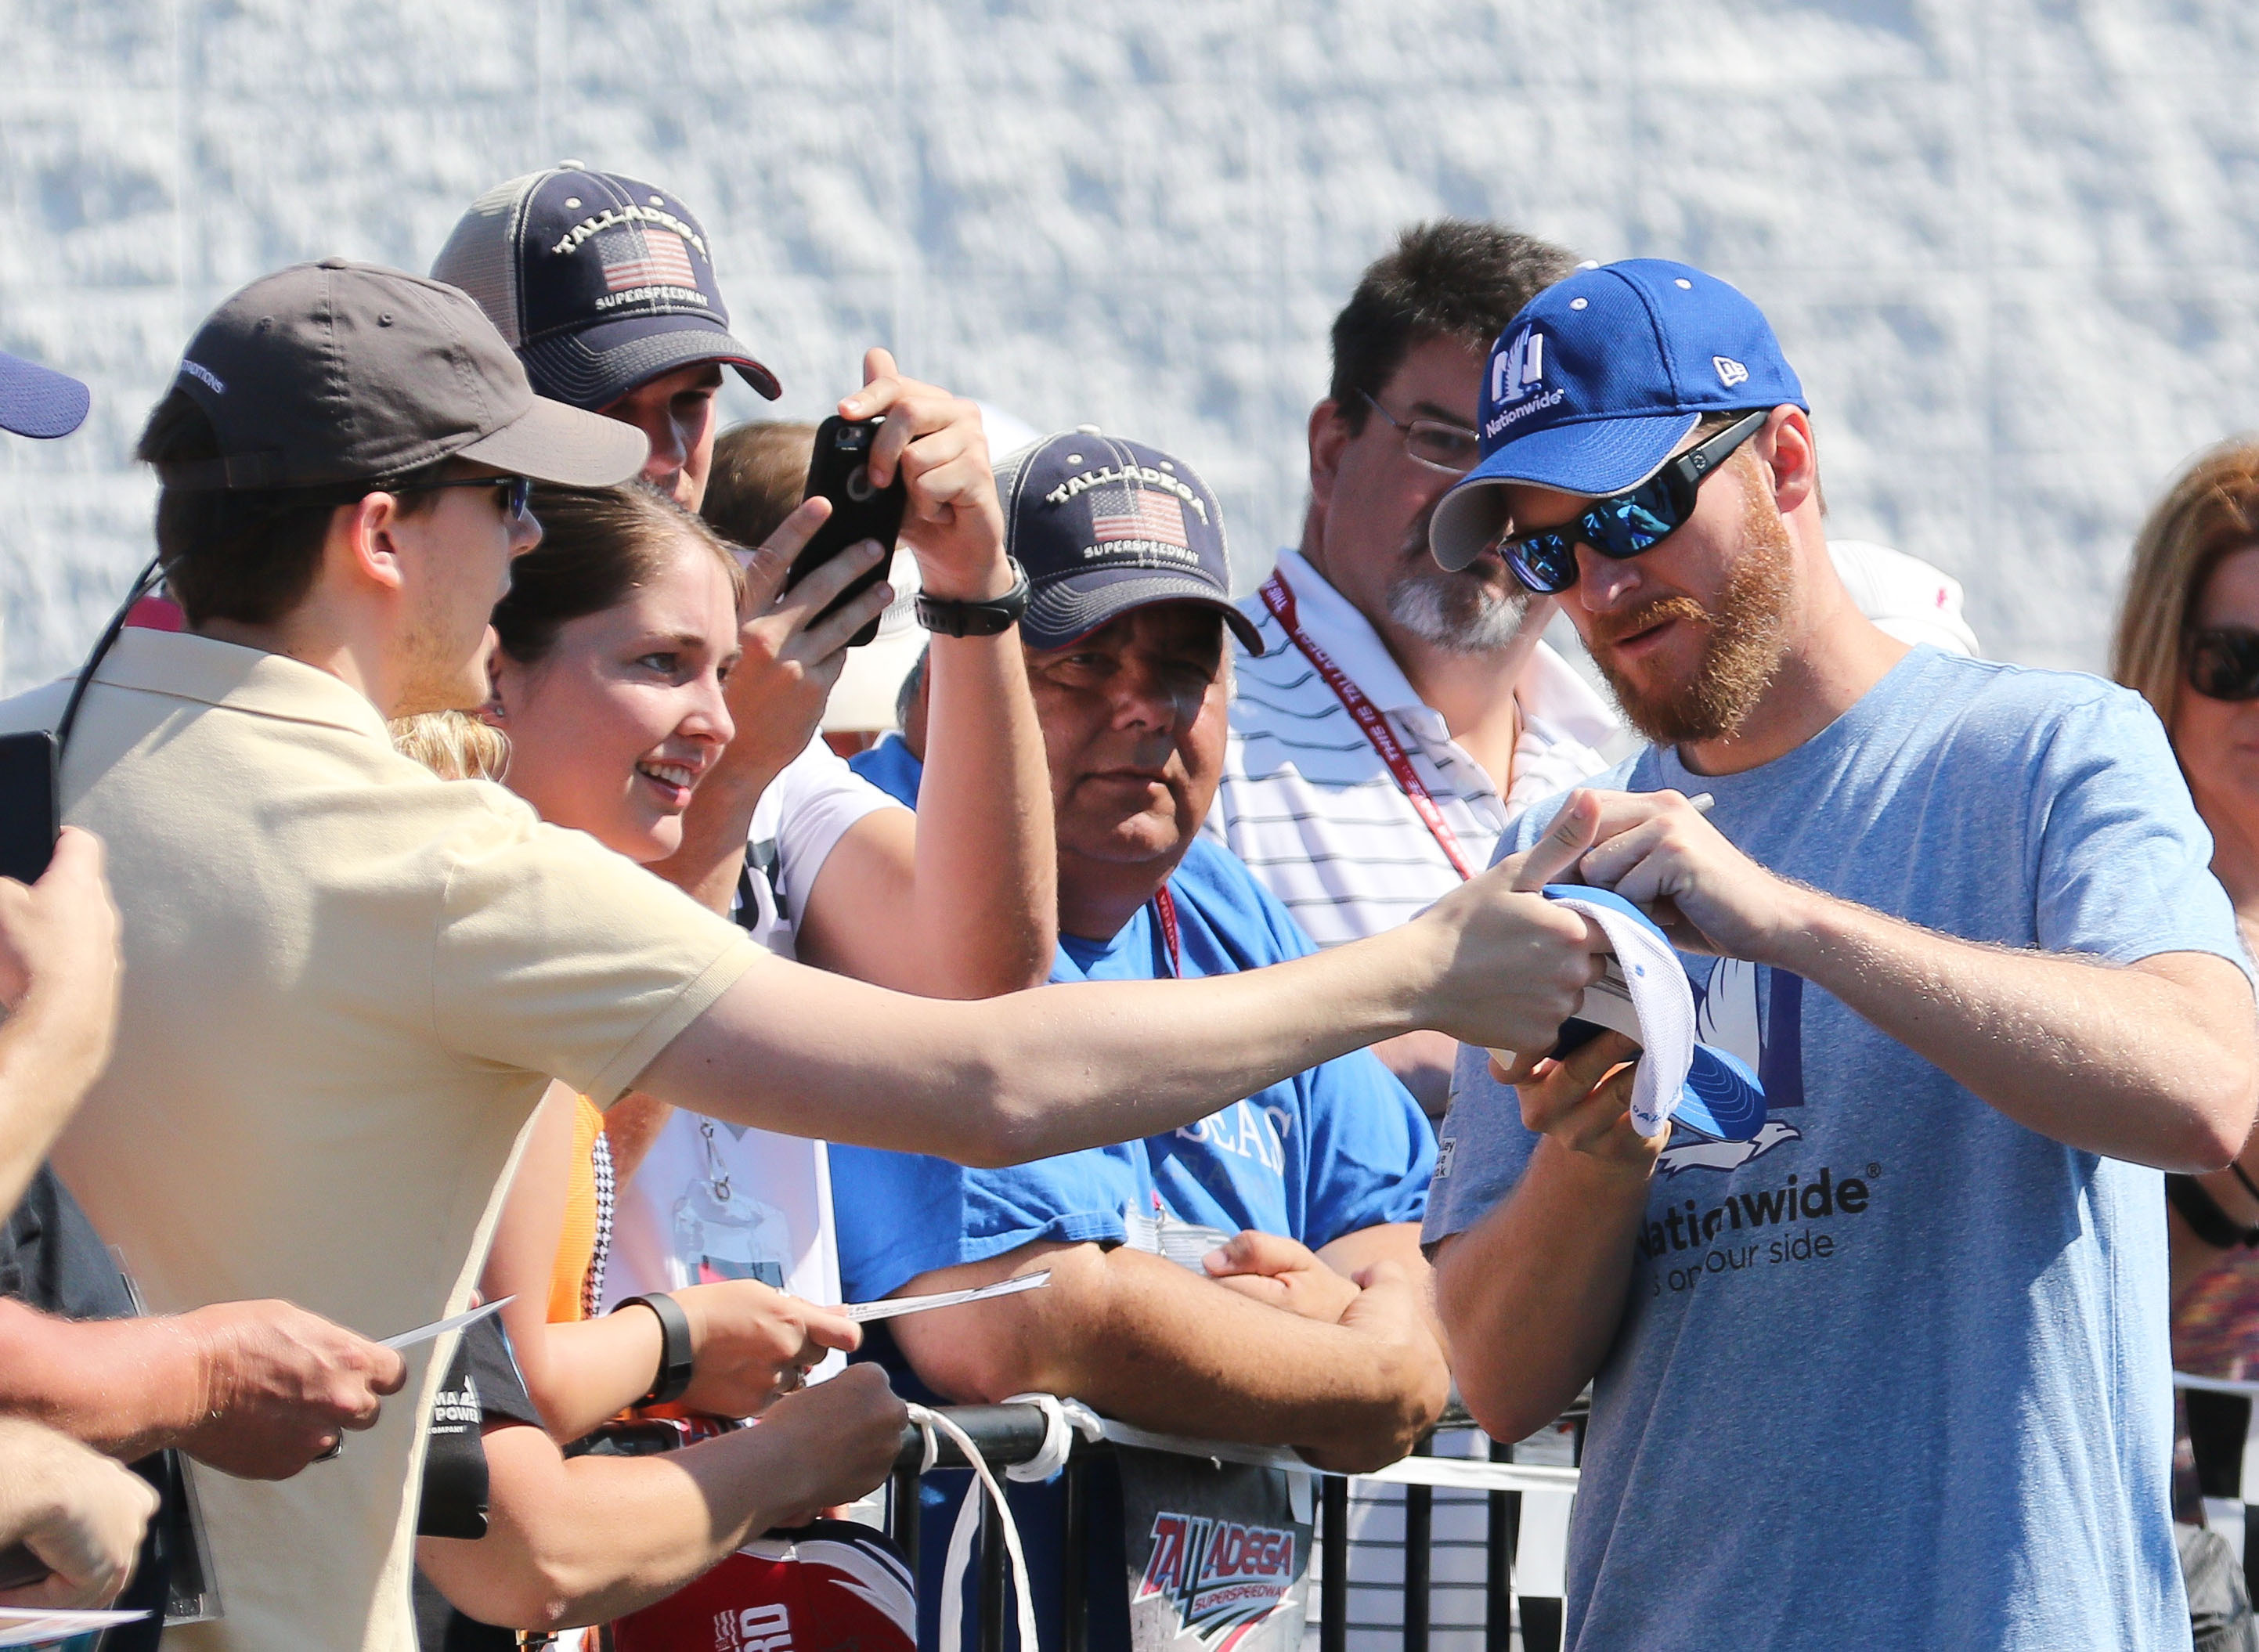 Loneliness, video games, and Dale Earnhardt Jr.’s quest for normalcy ...